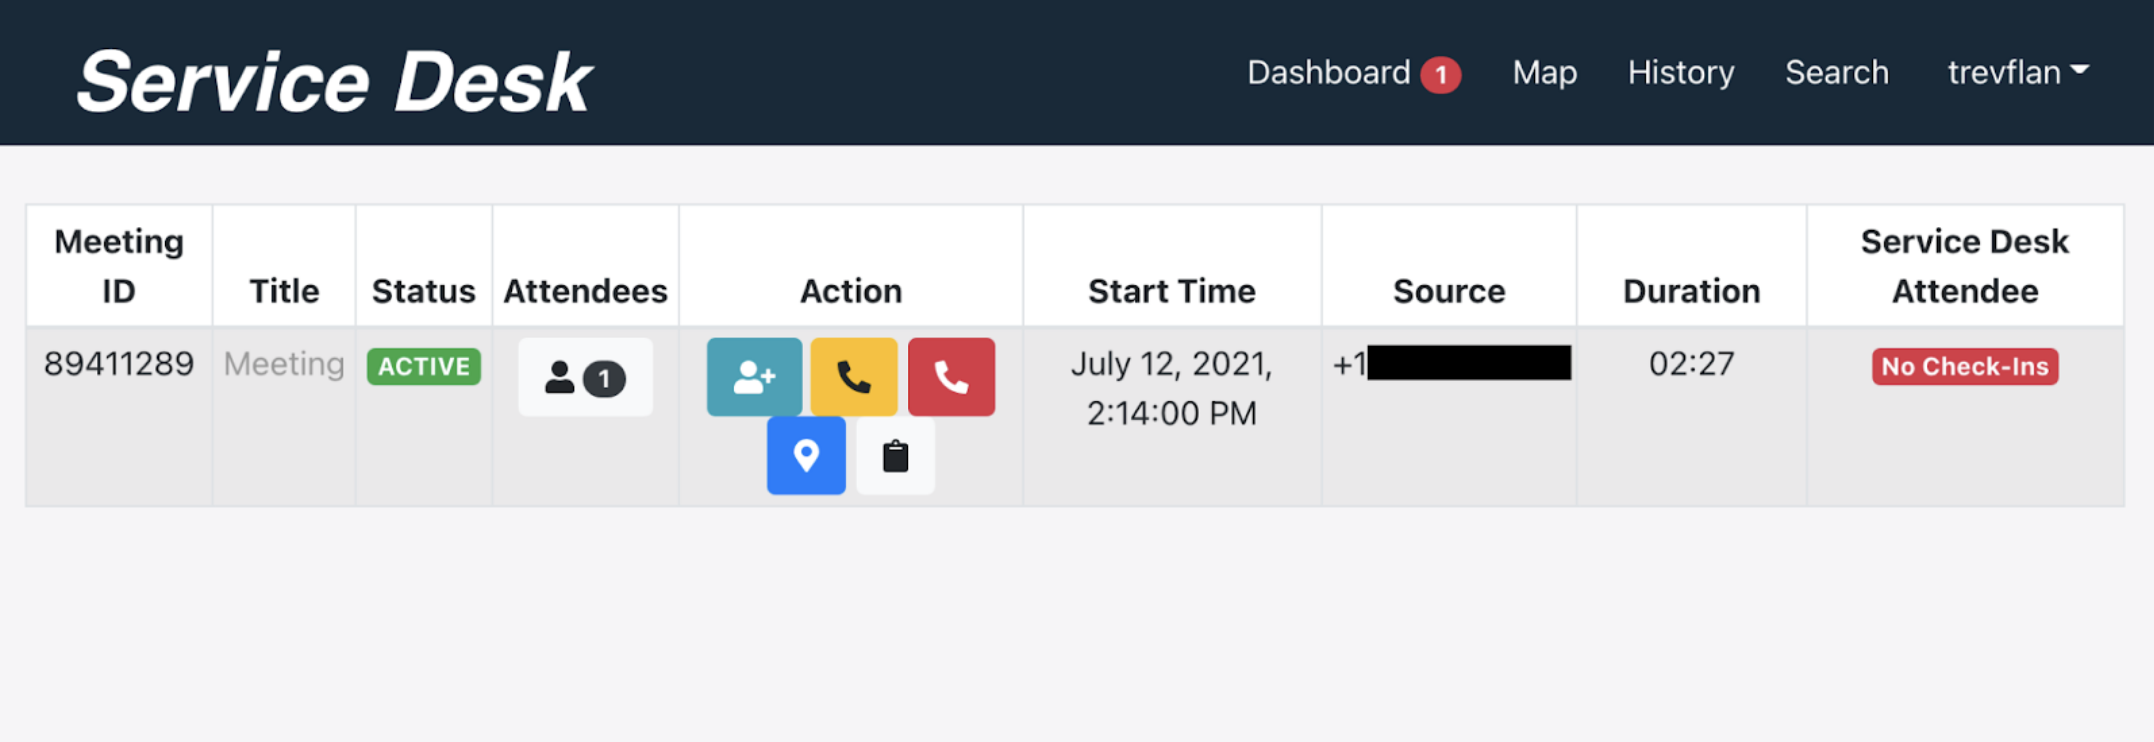 The image of the Service Desk shows a list of meetings and details including the meeting ID, title, status, attendees, action, start time, source duration, and service desk attendee.